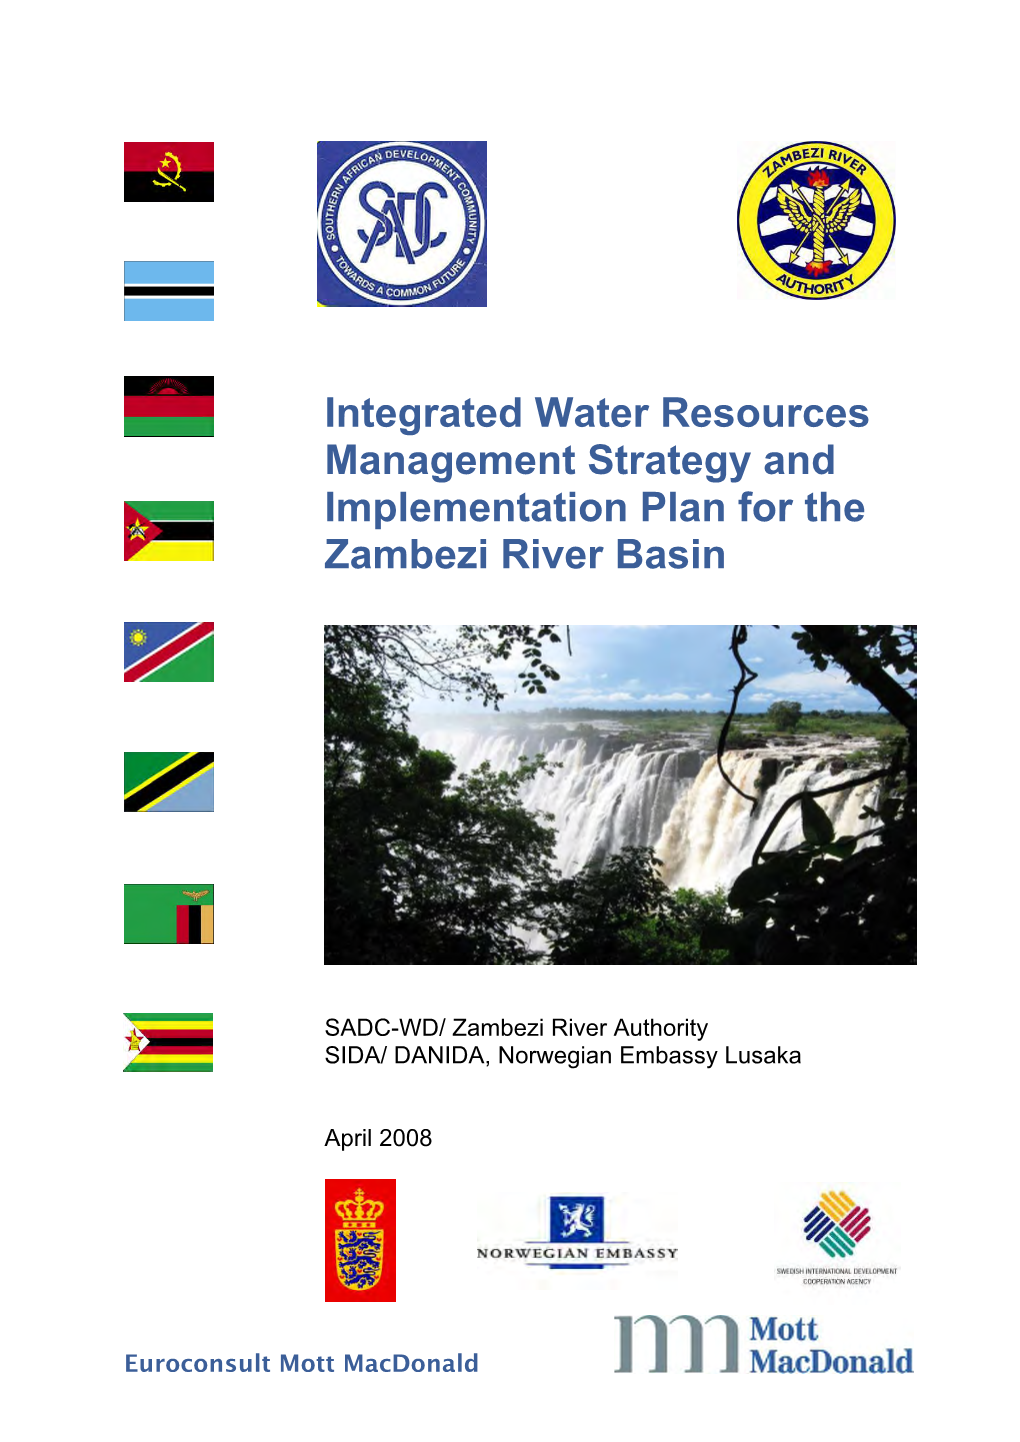 Integrated Water Resources Management Strategy and Implementation Plan for the Zambezi River Basin